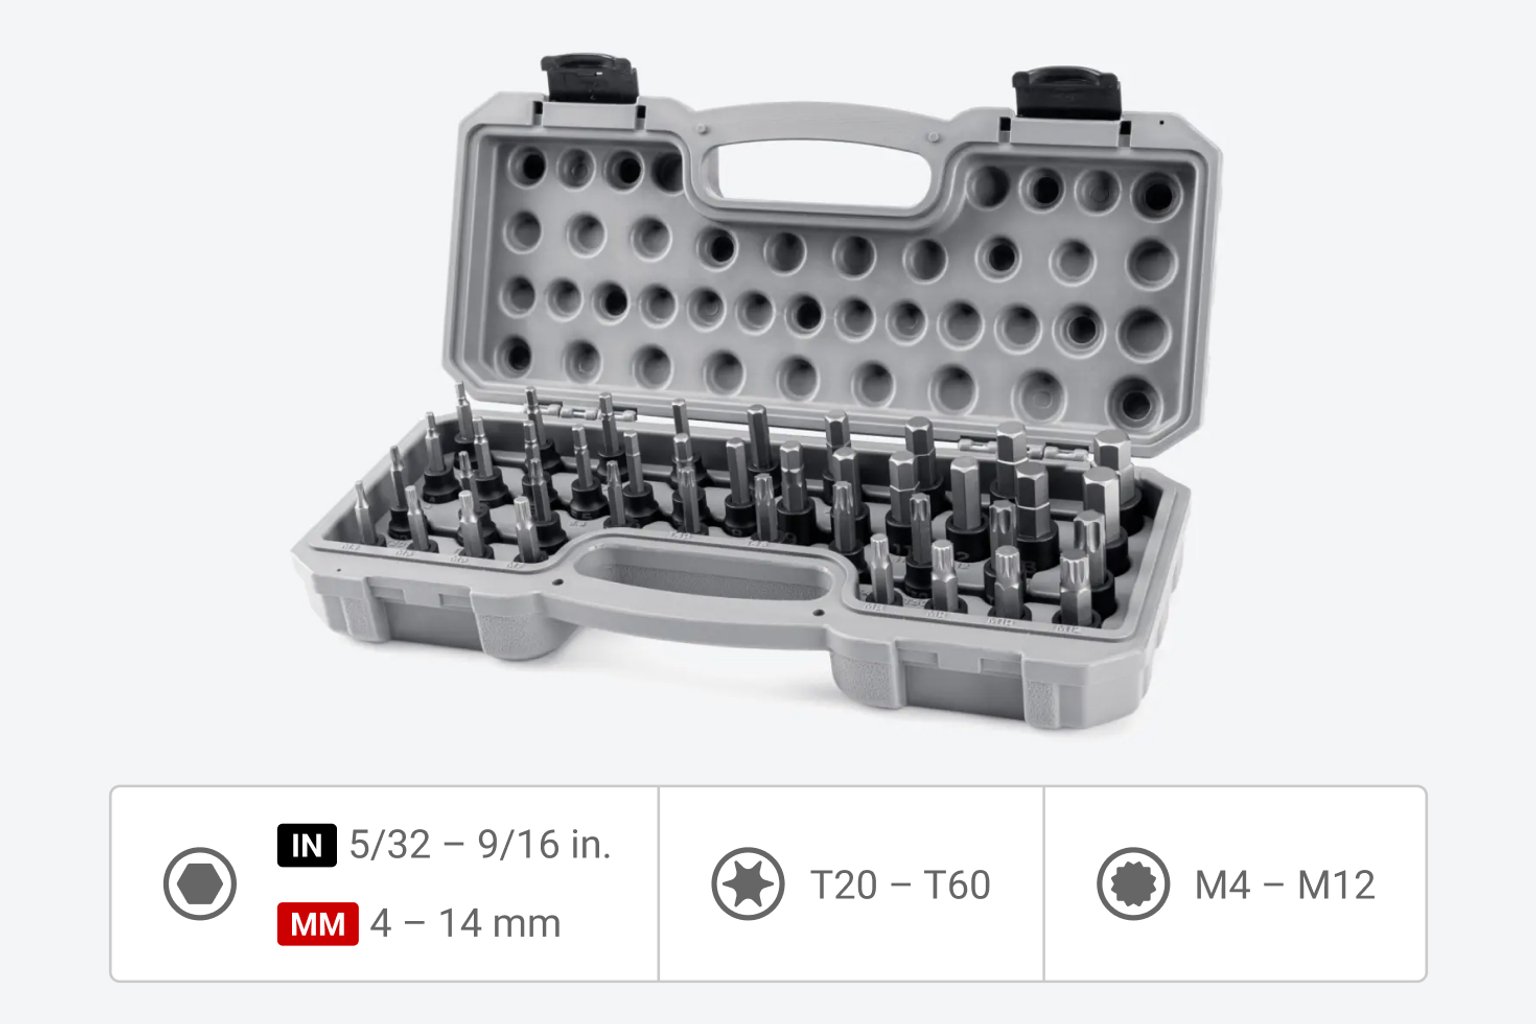 Tekton impact bit socket set in gray case. Includes sizes 5/32 - 9/16 in., 4 - 14 mm, T20 - T60, and M4 - M12.